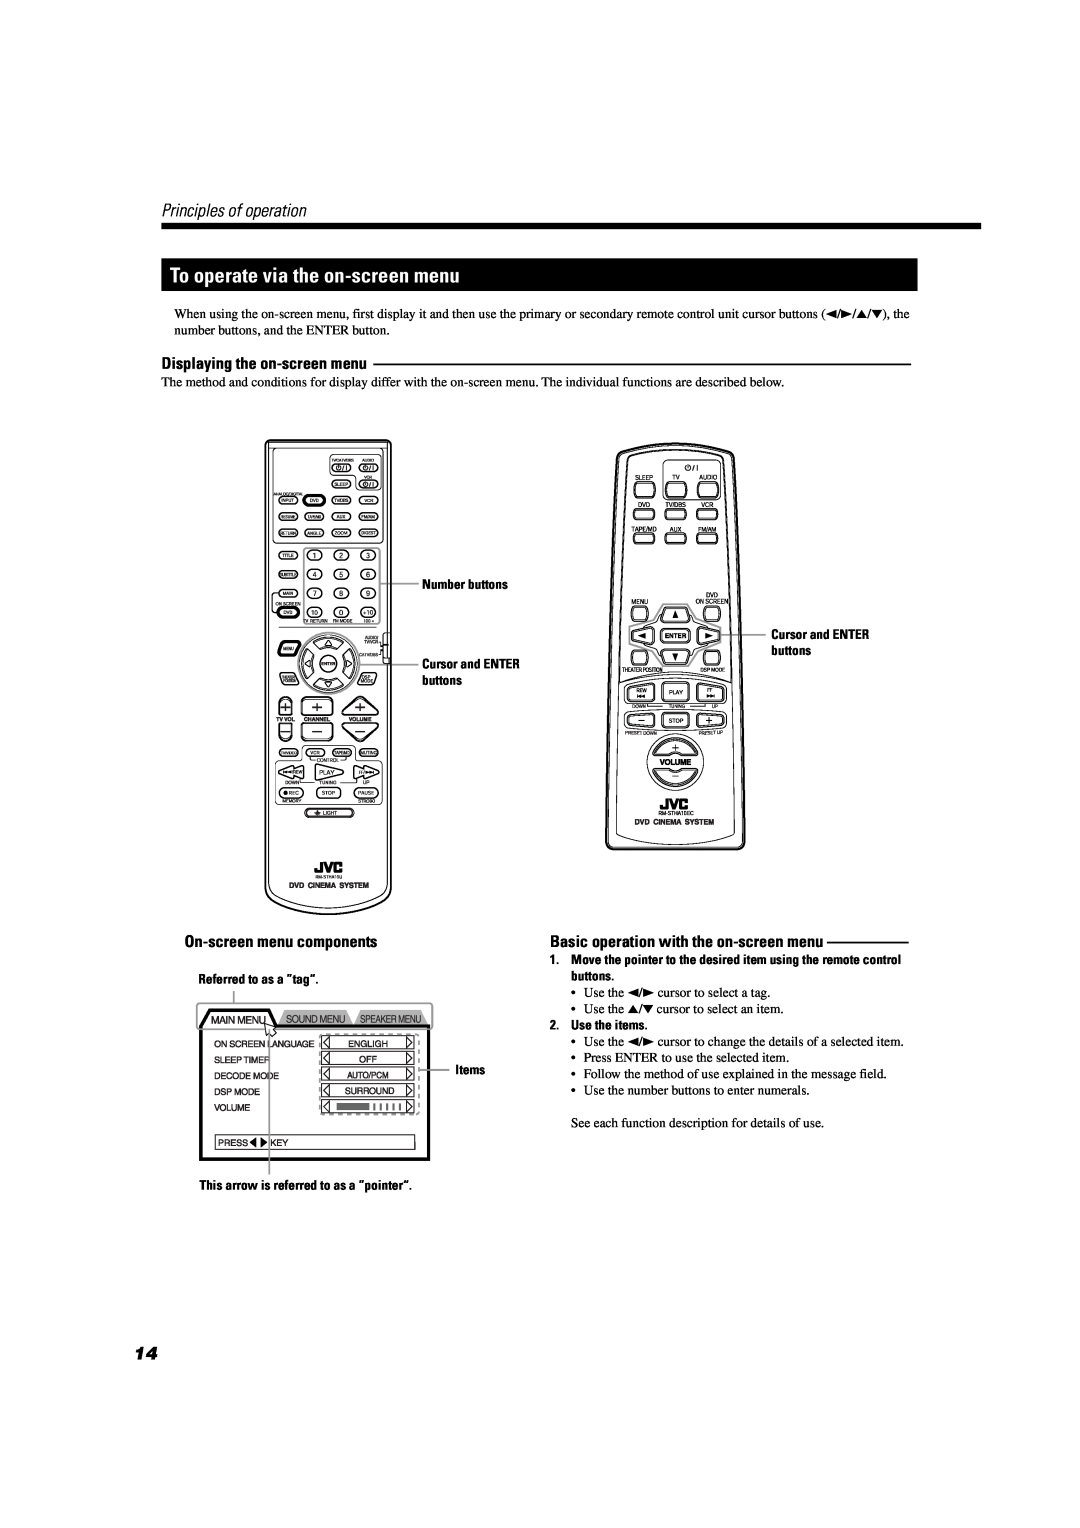 JVC TH-A104 To operate via the on-screenmenu, Principles of operation, On-screenmenu components, Cursor and ENTER buttons 